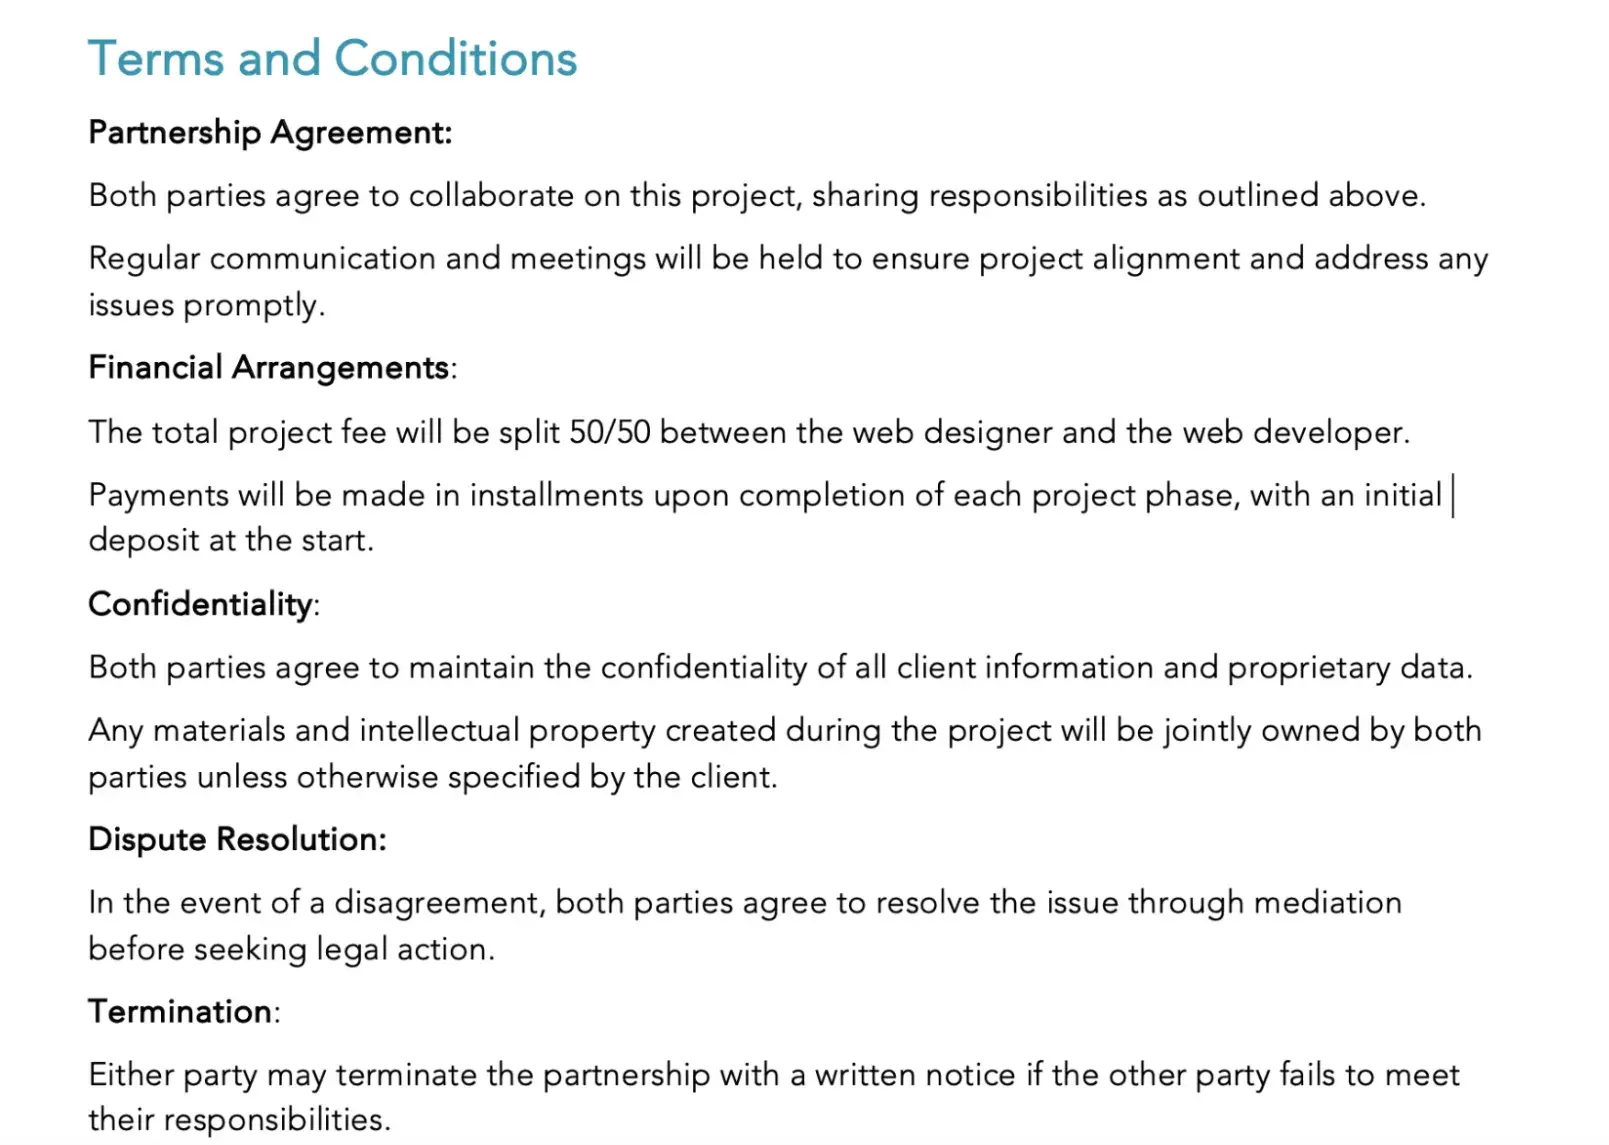 how to write partnership proposal terms and conditions